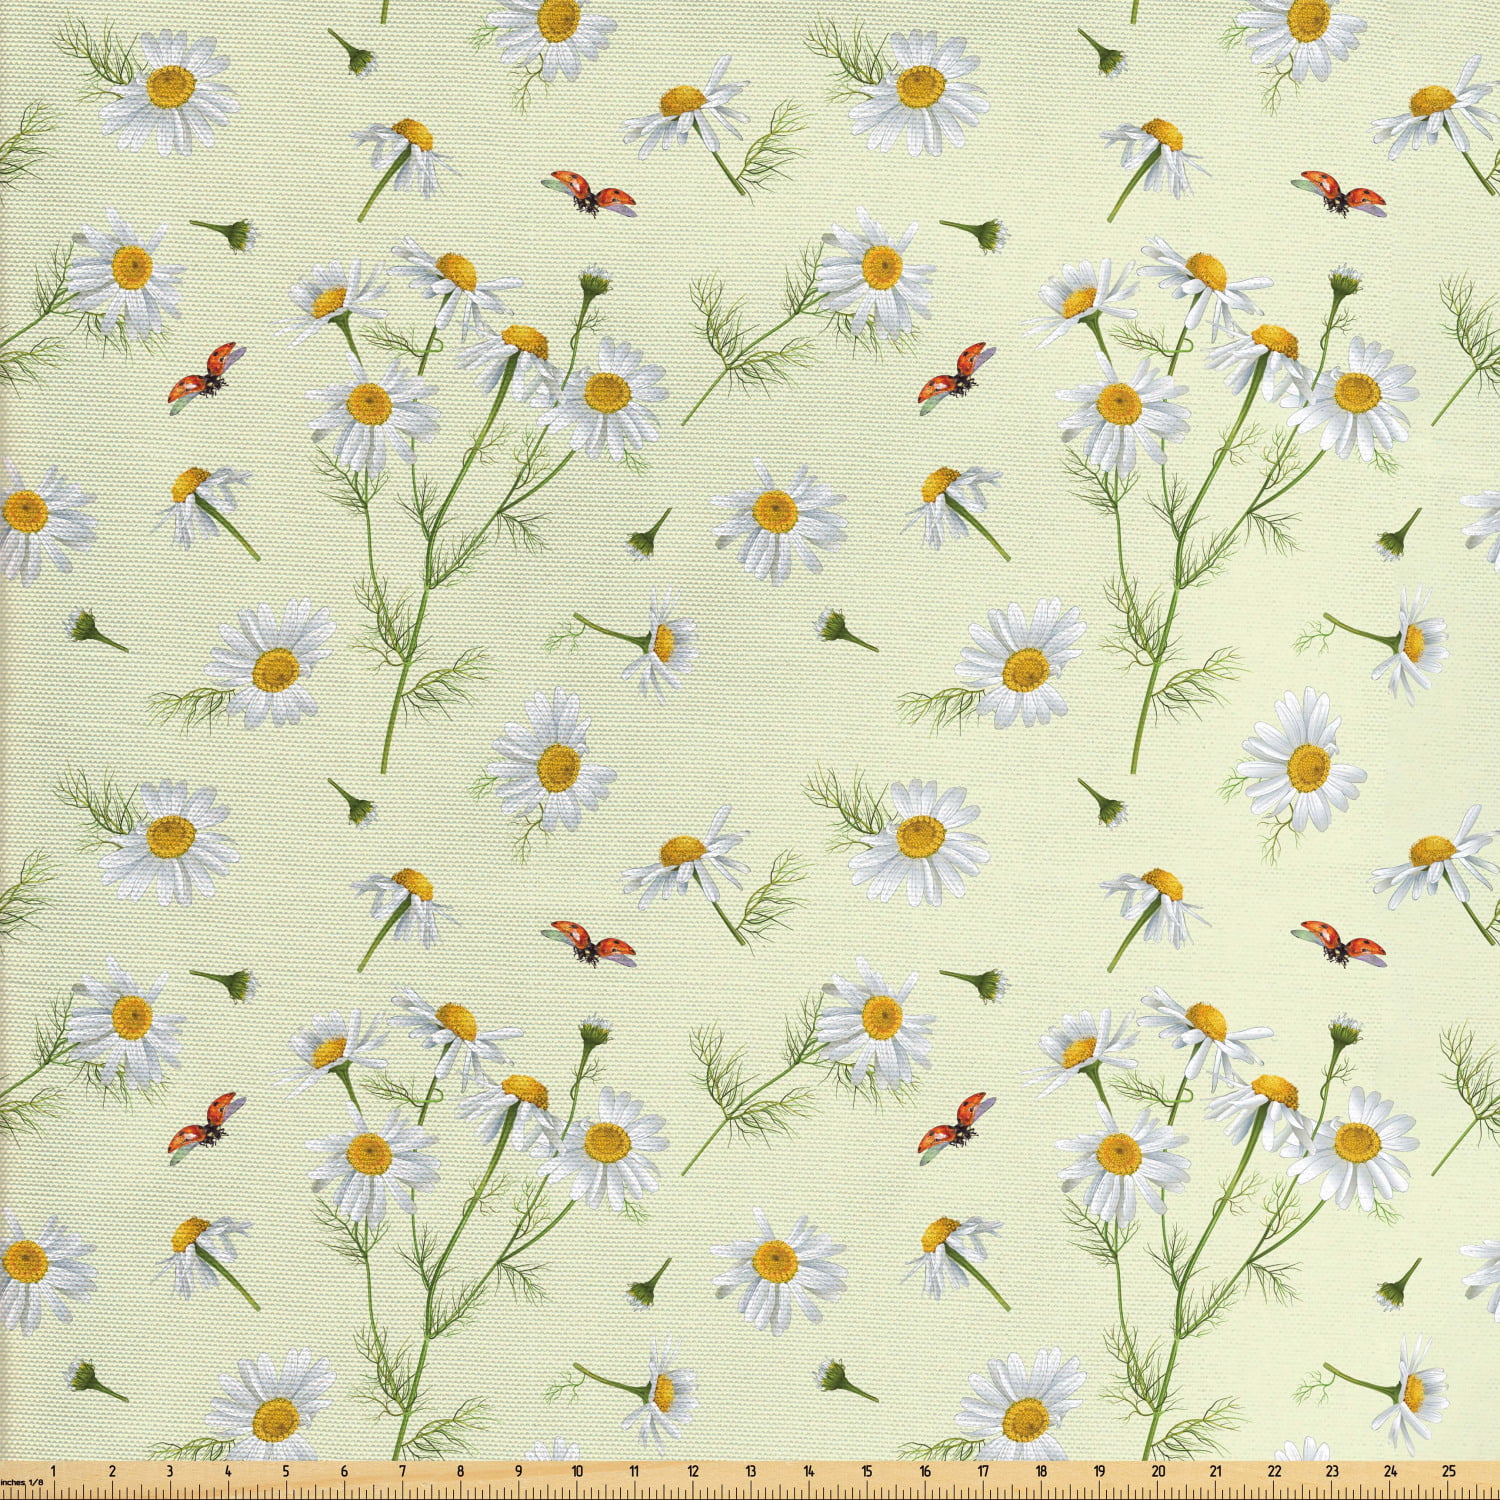 Daisy Fabric by The Yard, Realistic Garden Botany Artwork with